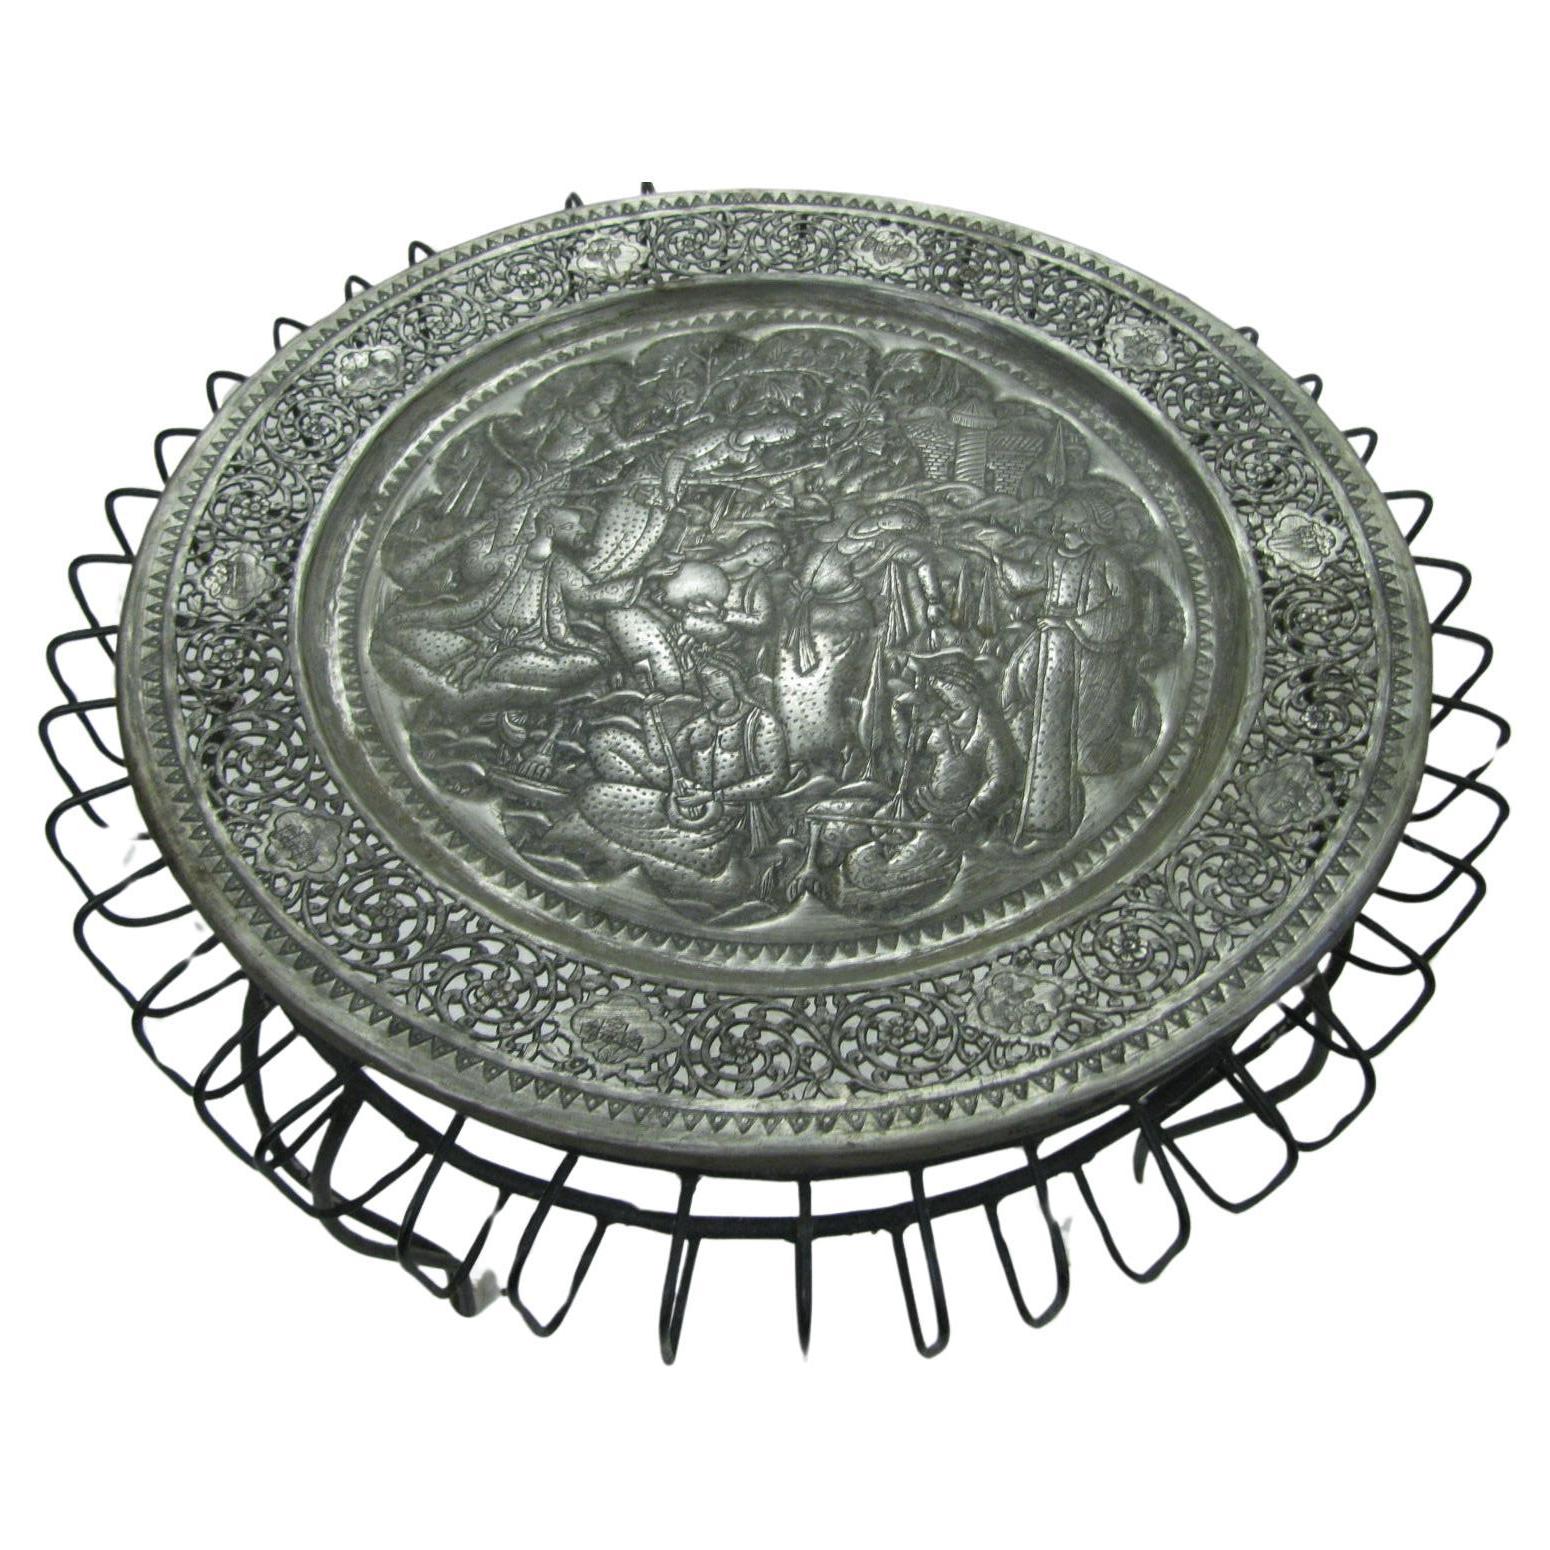 Fabulous large reticulated hand-hammered tray. Tin over copper with a stunning amount of hand hammered work. Scene with eight figures in a spiritual ceremony playing instruments and praying. Reticulated band surrounds the scene. Metalwork sits on a